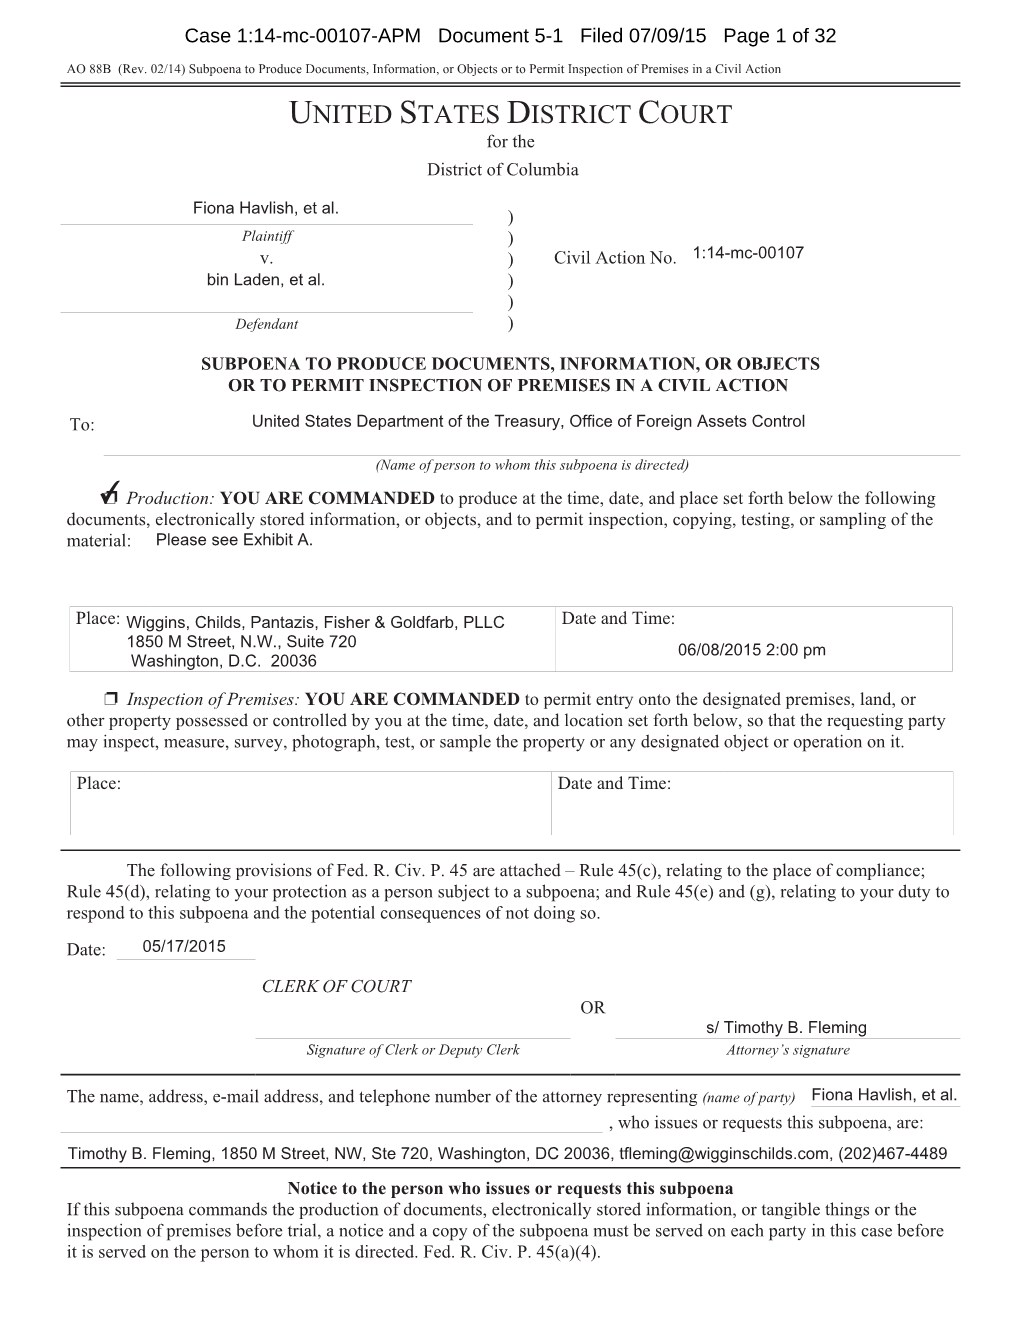 To View the May 17Th Subpoena